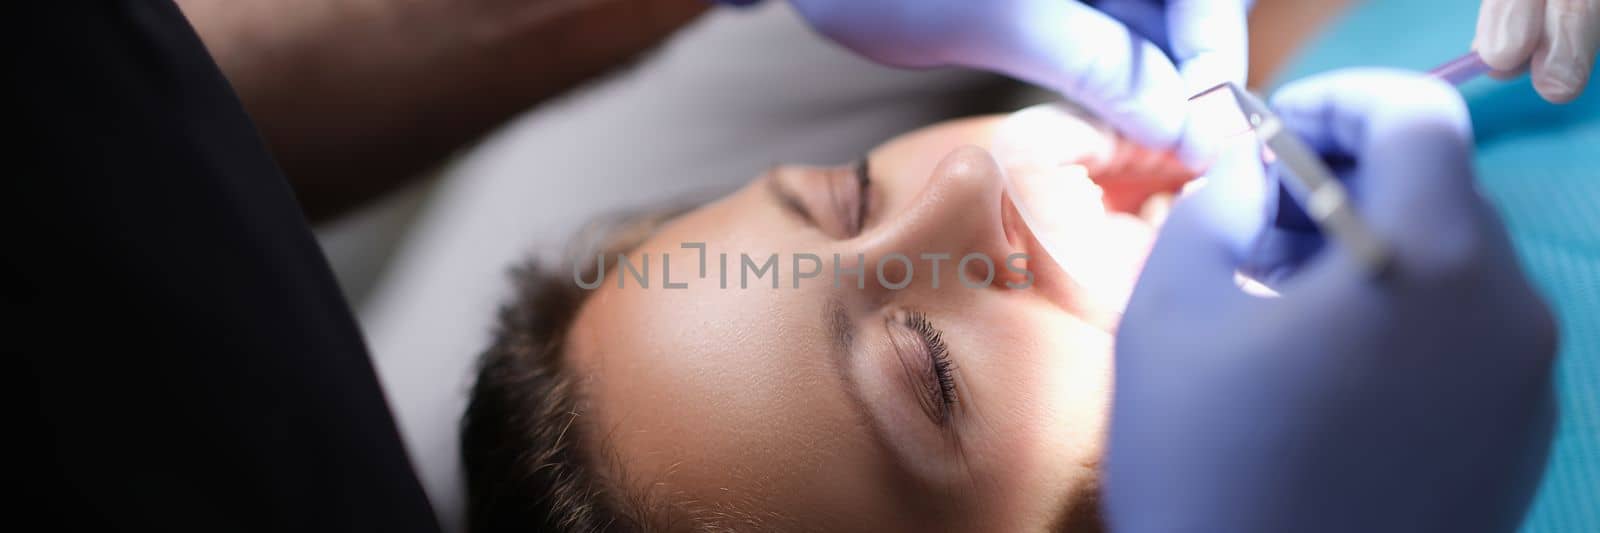 Dentist examines patient teeth at dentist and dental instrument. Doctor examines oral cavity of female patient